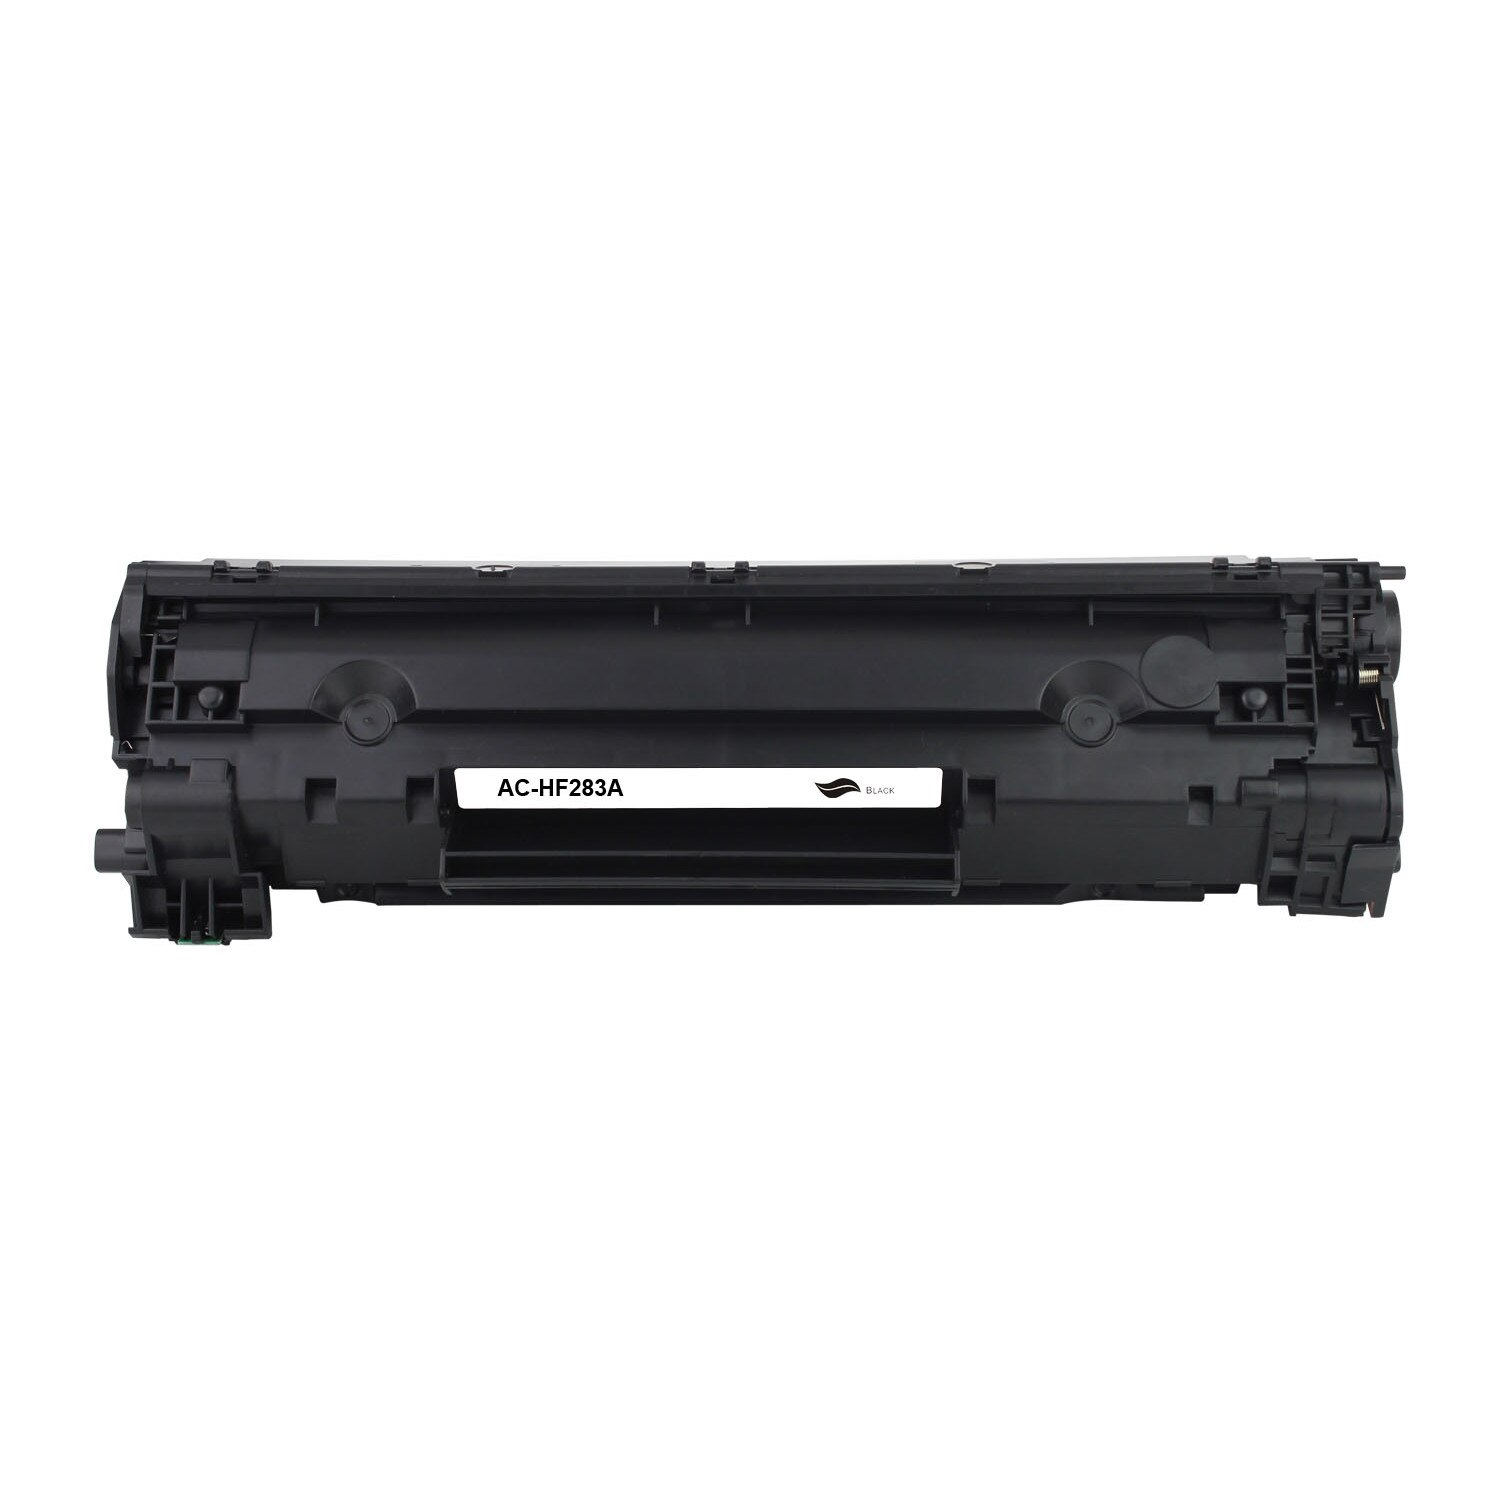 By law agreement yesterday Cartus Toner ECO BOX compatibil cu HP CF283A, 1500 pagini, black - eMAG.ro